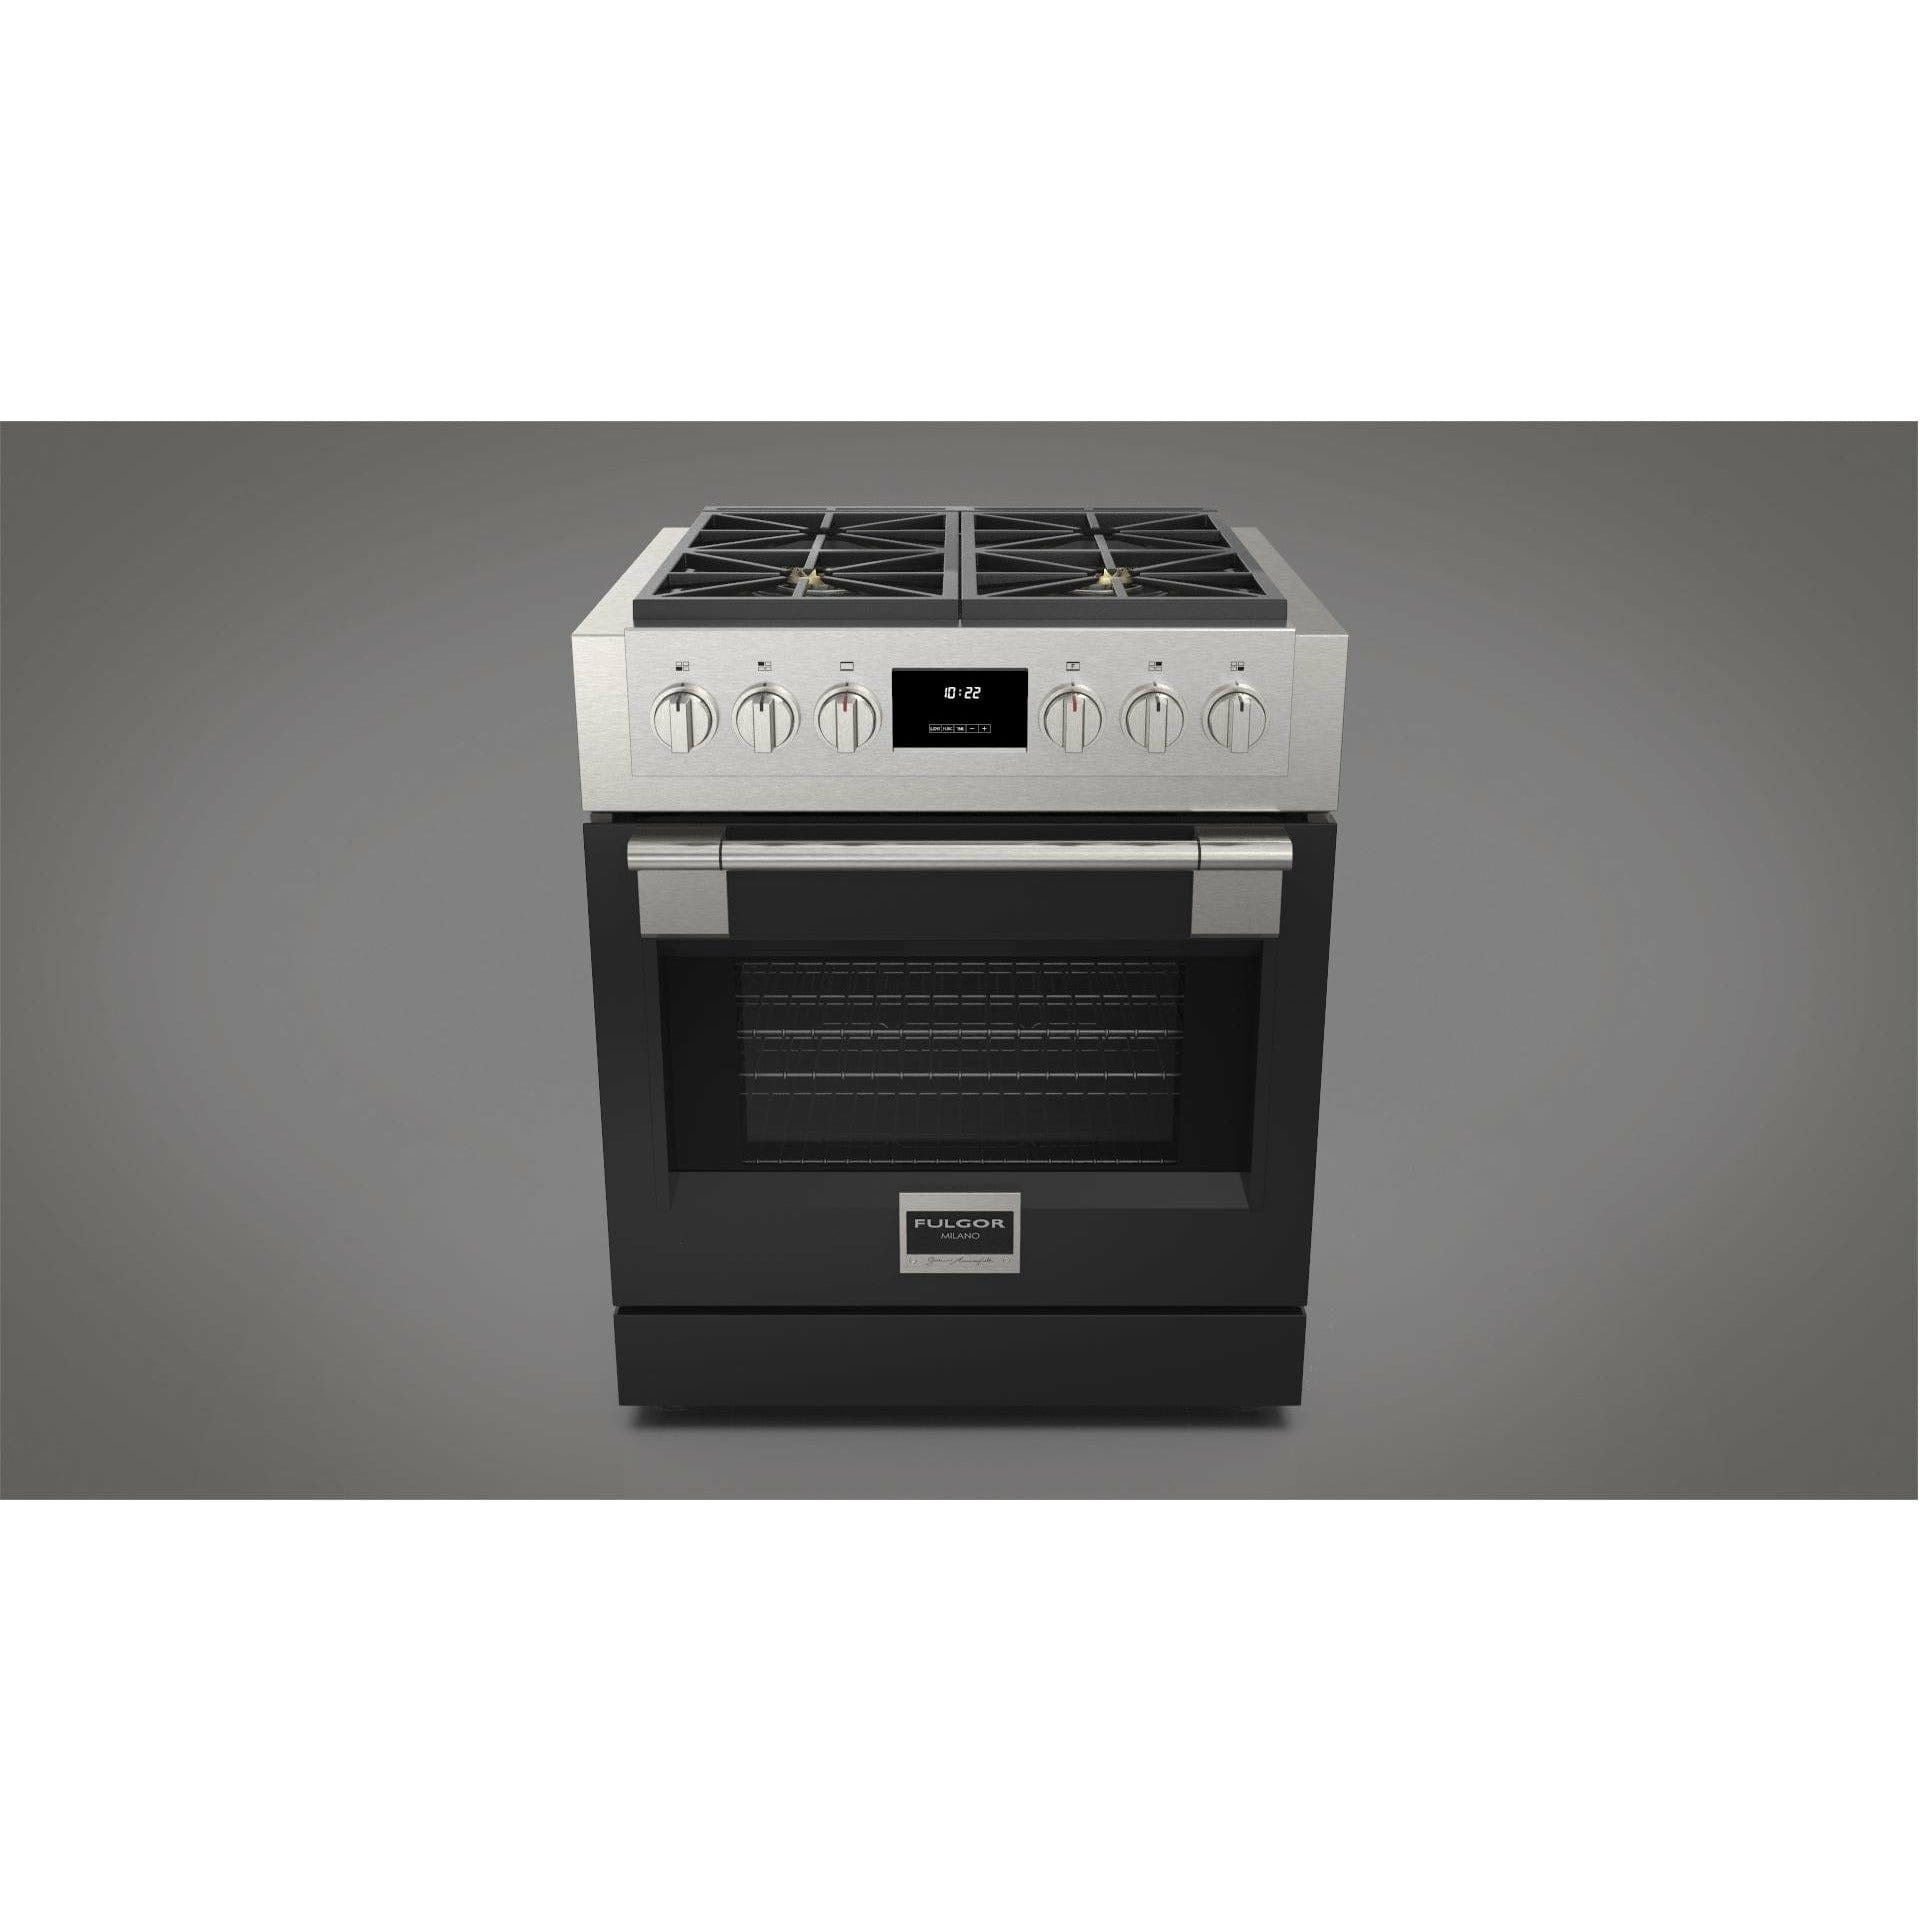 Fulgor Milano 30" Professional All Gas Range with 4 Dual-Flame Burners, 4.4 cu. ft. Capacity w/ Stainless Steel - F6PGR304S2 Ranges PDRKIT30BK Luxury Appliances Direct